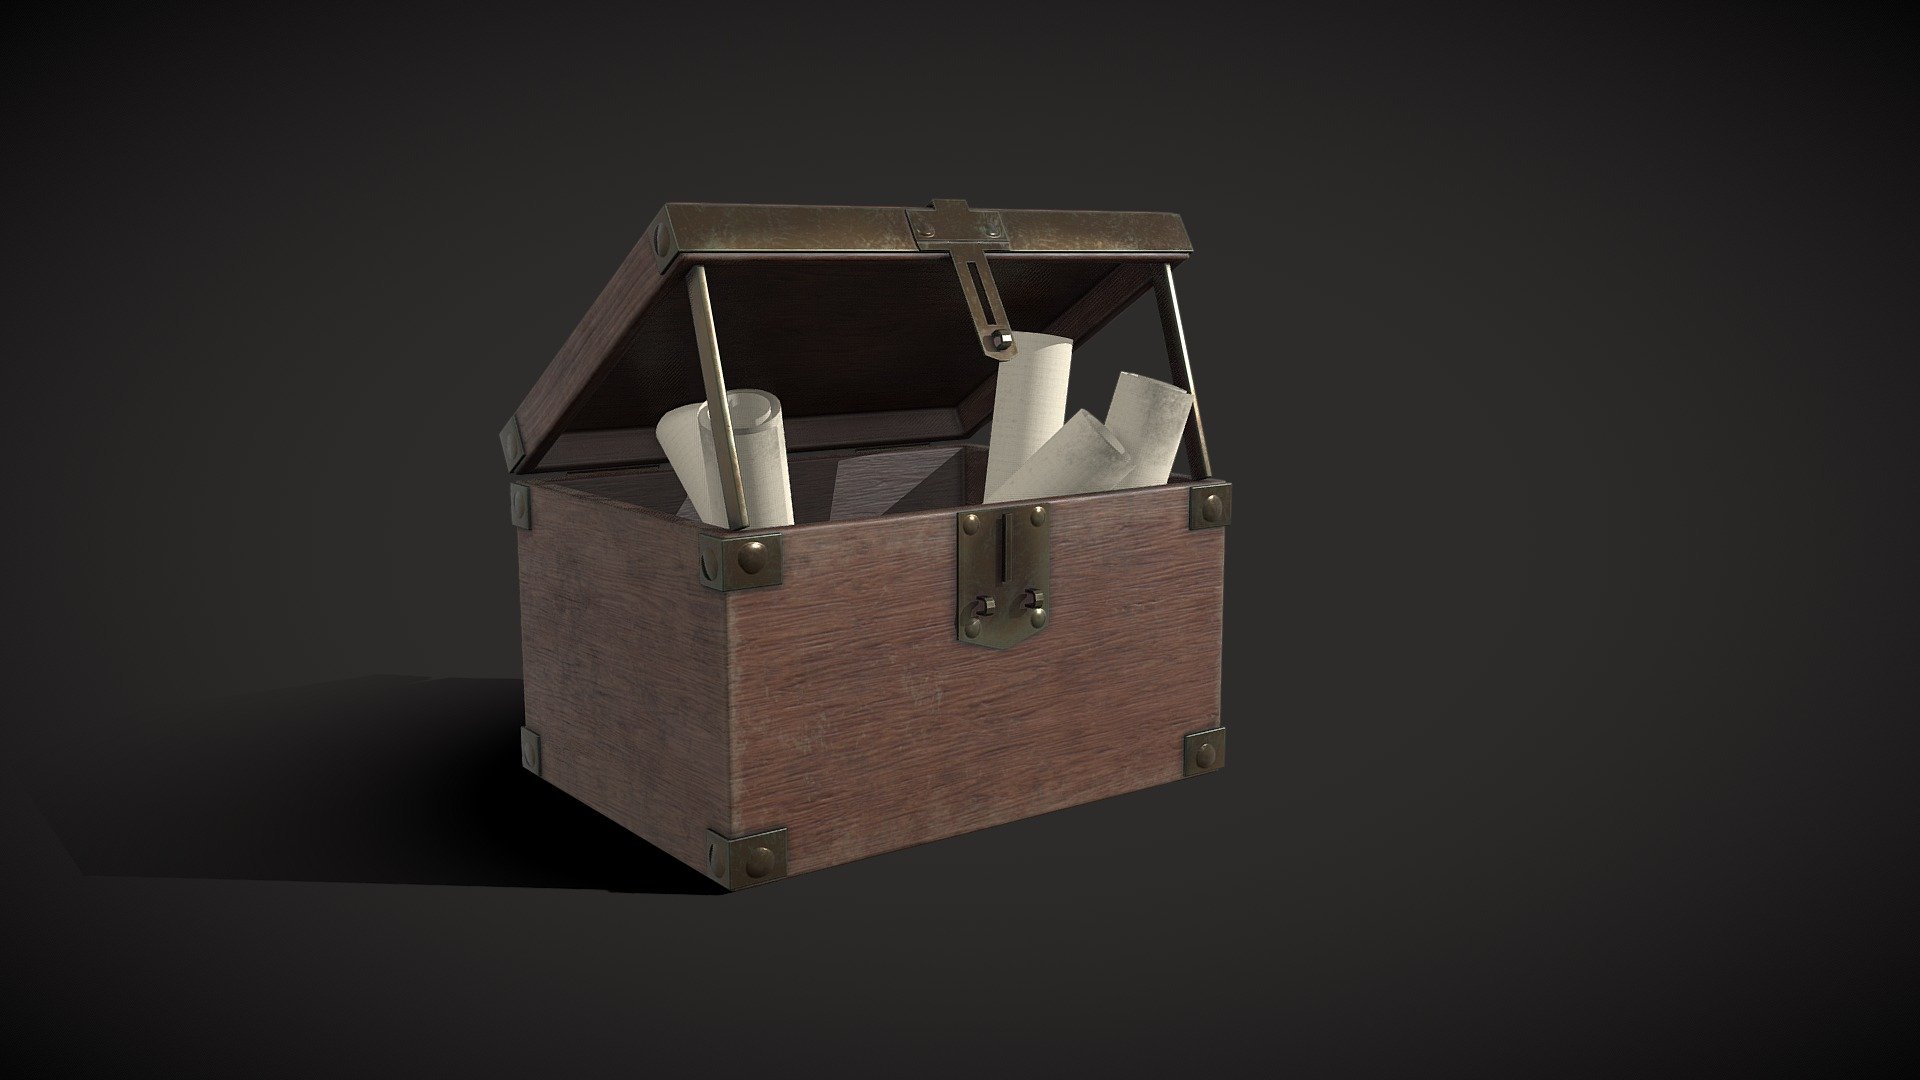 Replica of a Roman chest from the 1st Century A.D. from the furniture recreation from the Imperial Villa of Pompei. It has a pin closure system and metal reinforcements to secure the content.
Historically accurate game ready asset modeled in Blender and high quality PBR (Diffuse/Metallic/Roughness/Normal_OpenGL) textures in Substance Painter at 4k 2k and 1k resolution and subdivision ready for different LOD implementations, at FBX and OBJ and .blend files to work with any 3D software.

LOD 00
Vertex 6953
Faces 6668

LOD 01
Vertex 1458
Faces 1090

References:
Pompei: Villa Imperiale-Alcova

https://www.youtube.com/watch?v=Xwff6XfPOIU

“Pompei come duemila anni fa: arredi ricostruiti nelle domus”

https://www.ilmattino.it/napoli/cultura/pompei_come_duemila_anni_fa_arredi_ricostruiti_nelle_domus-1888961.html - Roman Chest - Buy Royalty Free 3D model by XYZ 3Dassets (@XYZ3Dassets) 3d model